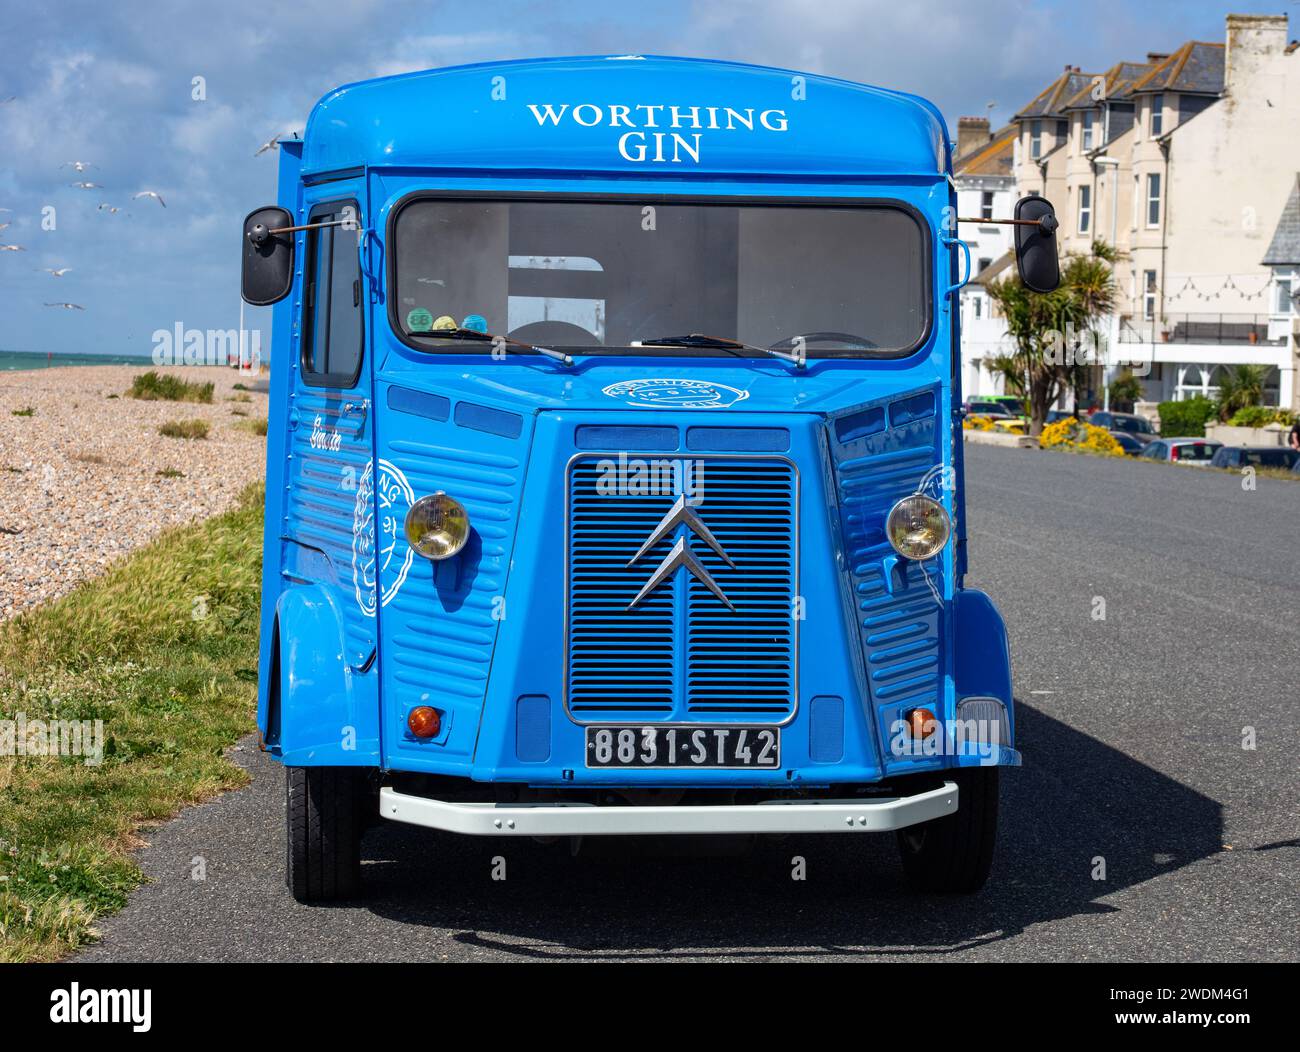 Worthing gin Blue Citroen H van sul lungomare a Worthing West Sussex UK Foto Stock